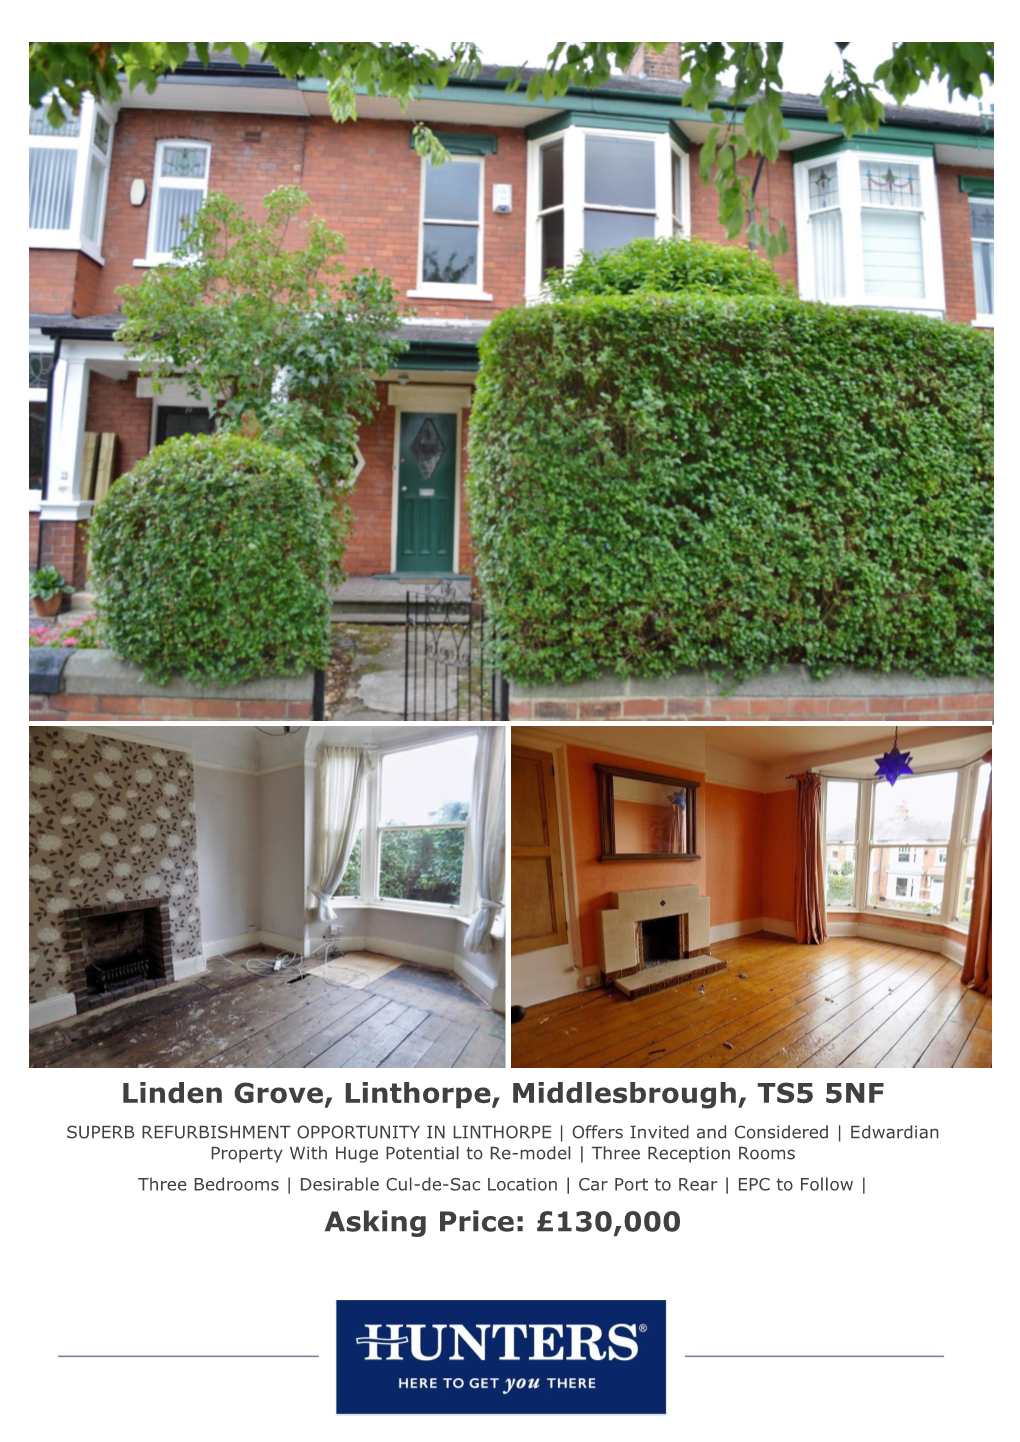 Linden Grove, Linthorpe, Middlesbrough, TS5 5NF Asking Price